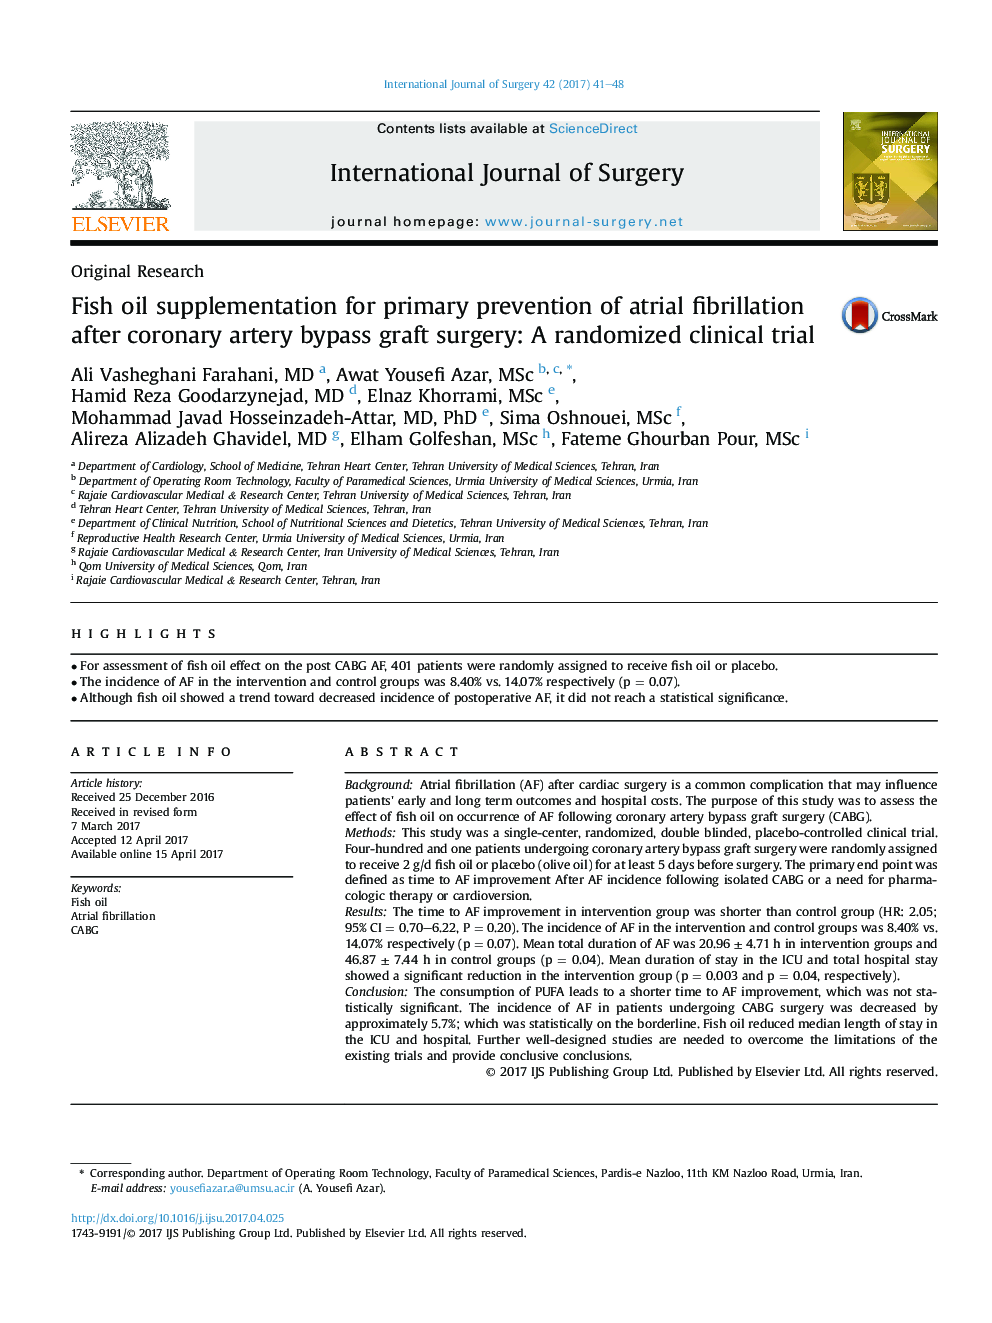 Original ResearchFish oil supplementation for primary prevention of atrial fibrillation after coronary artery bypass graft surgery: A randomized clinical trial